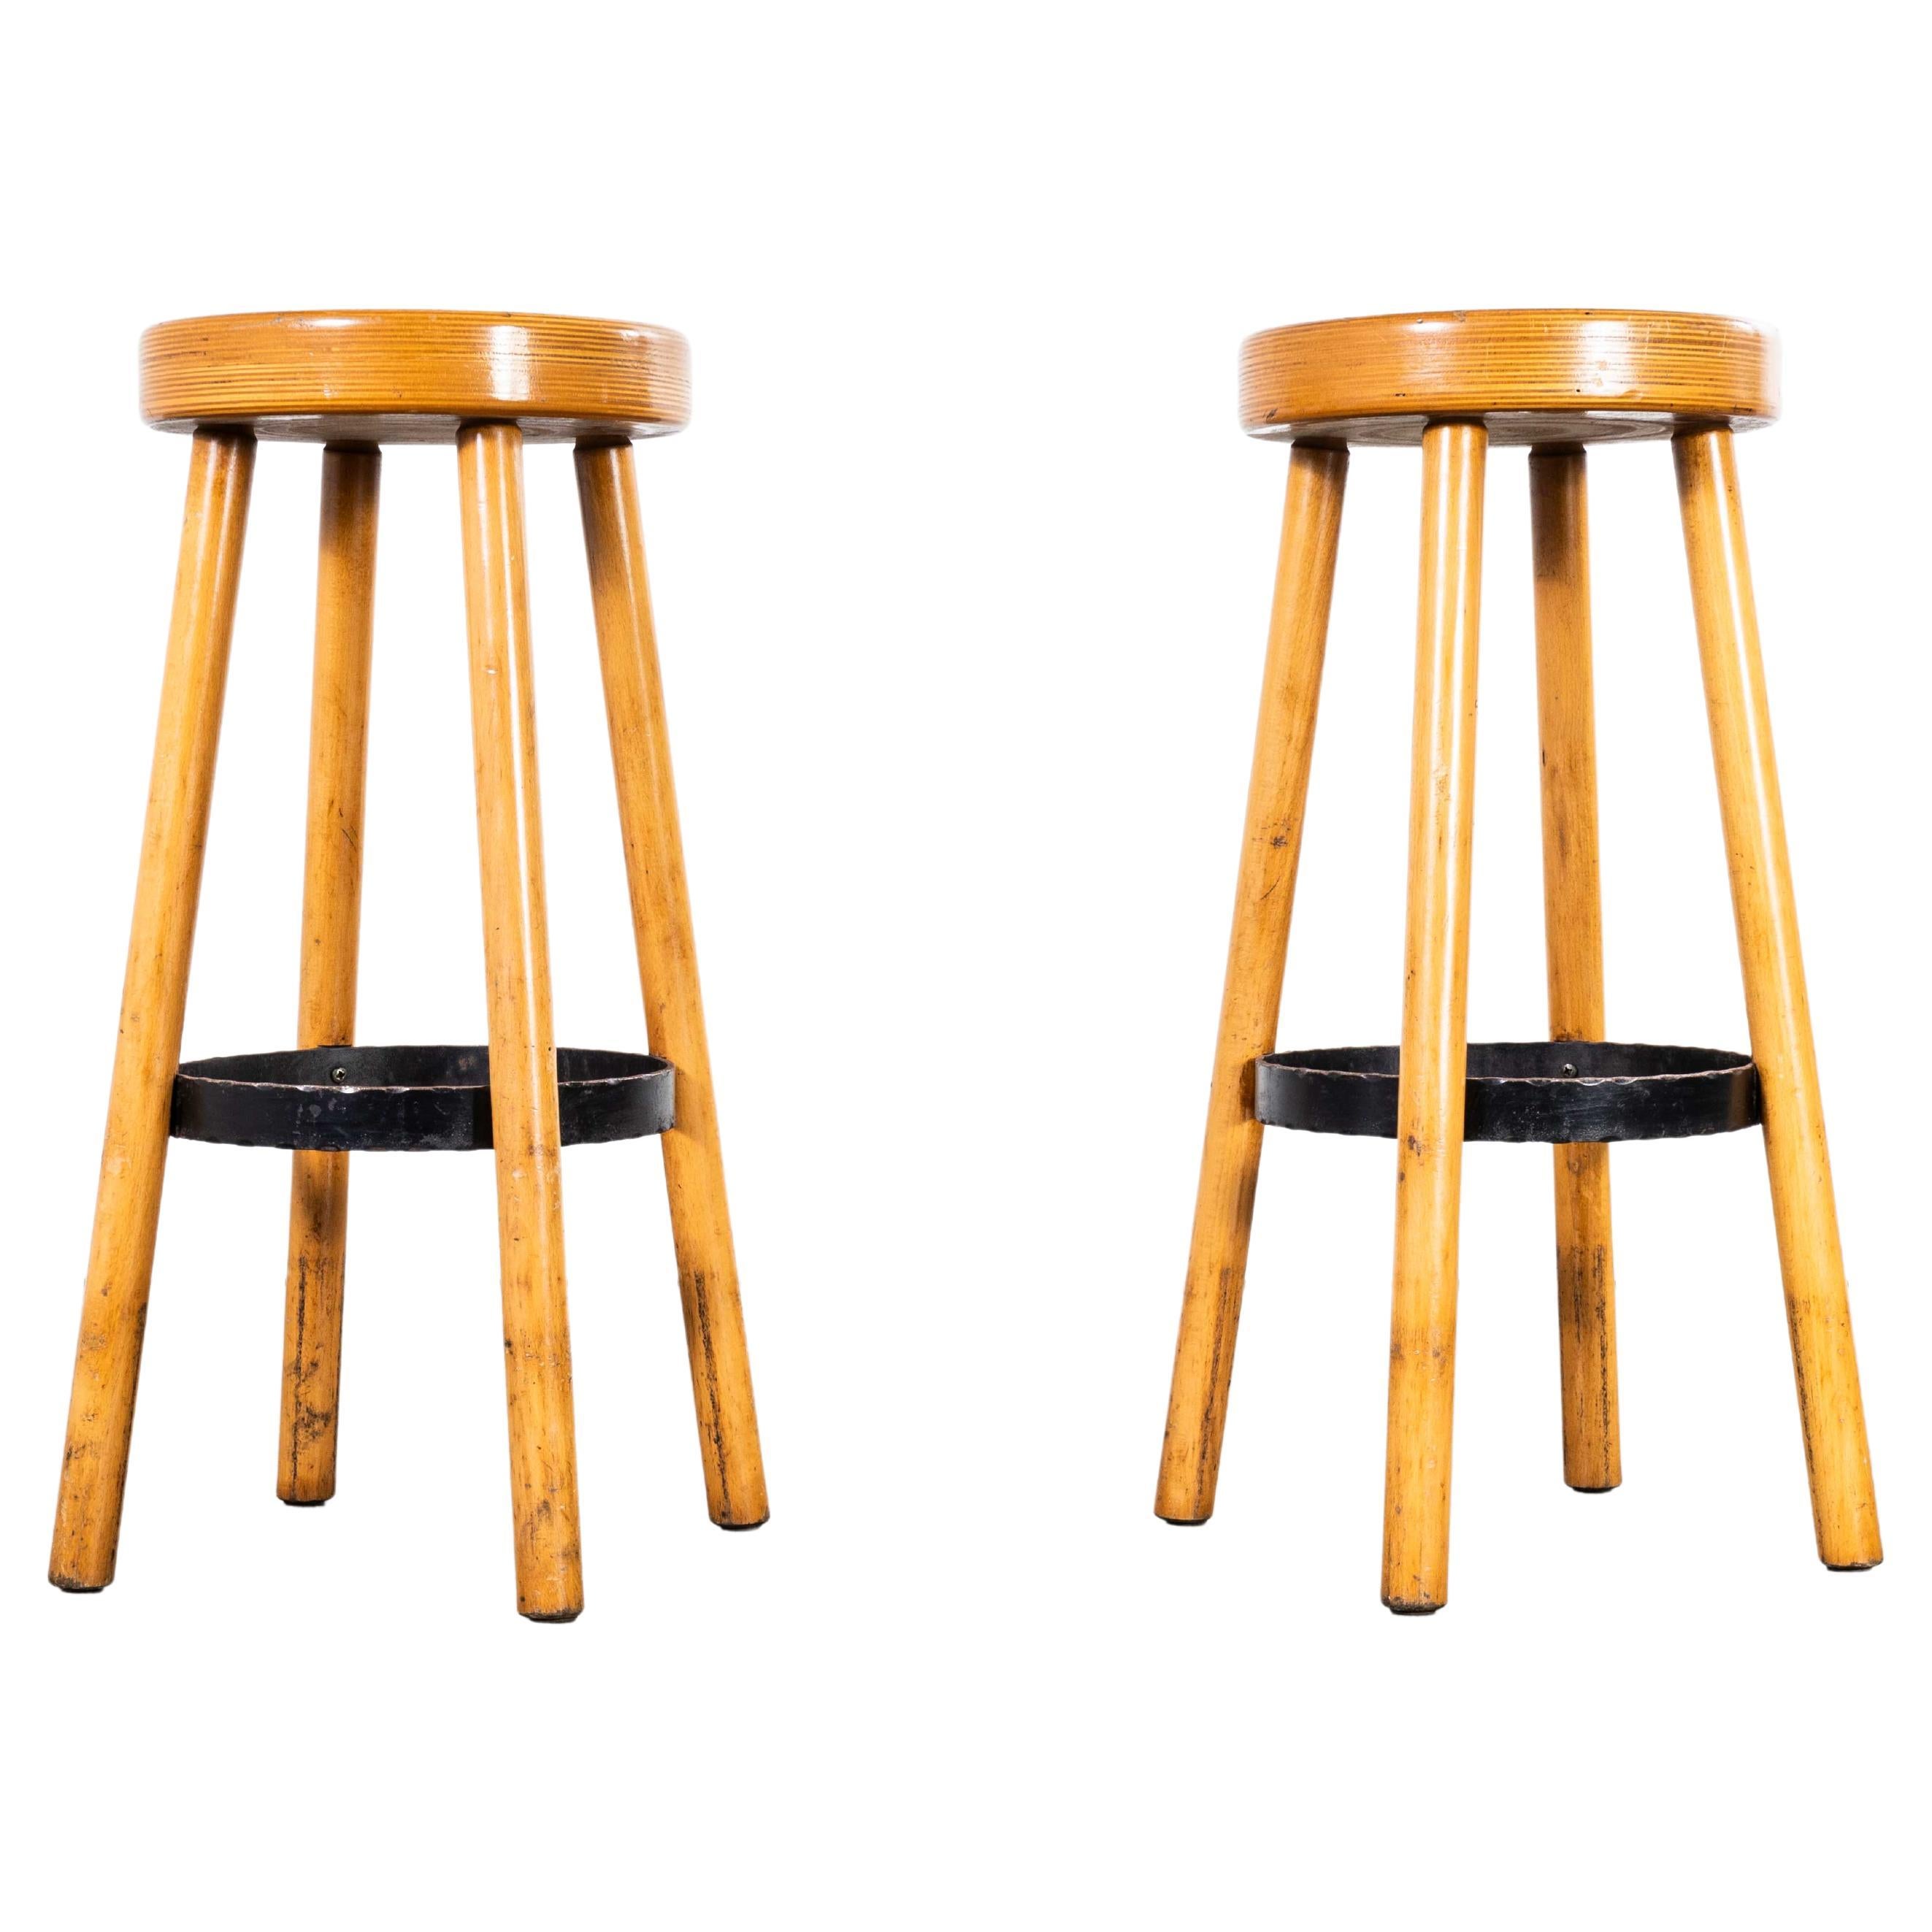 1960's French Pair Of Tall Bar Stools - Blonde For Sale